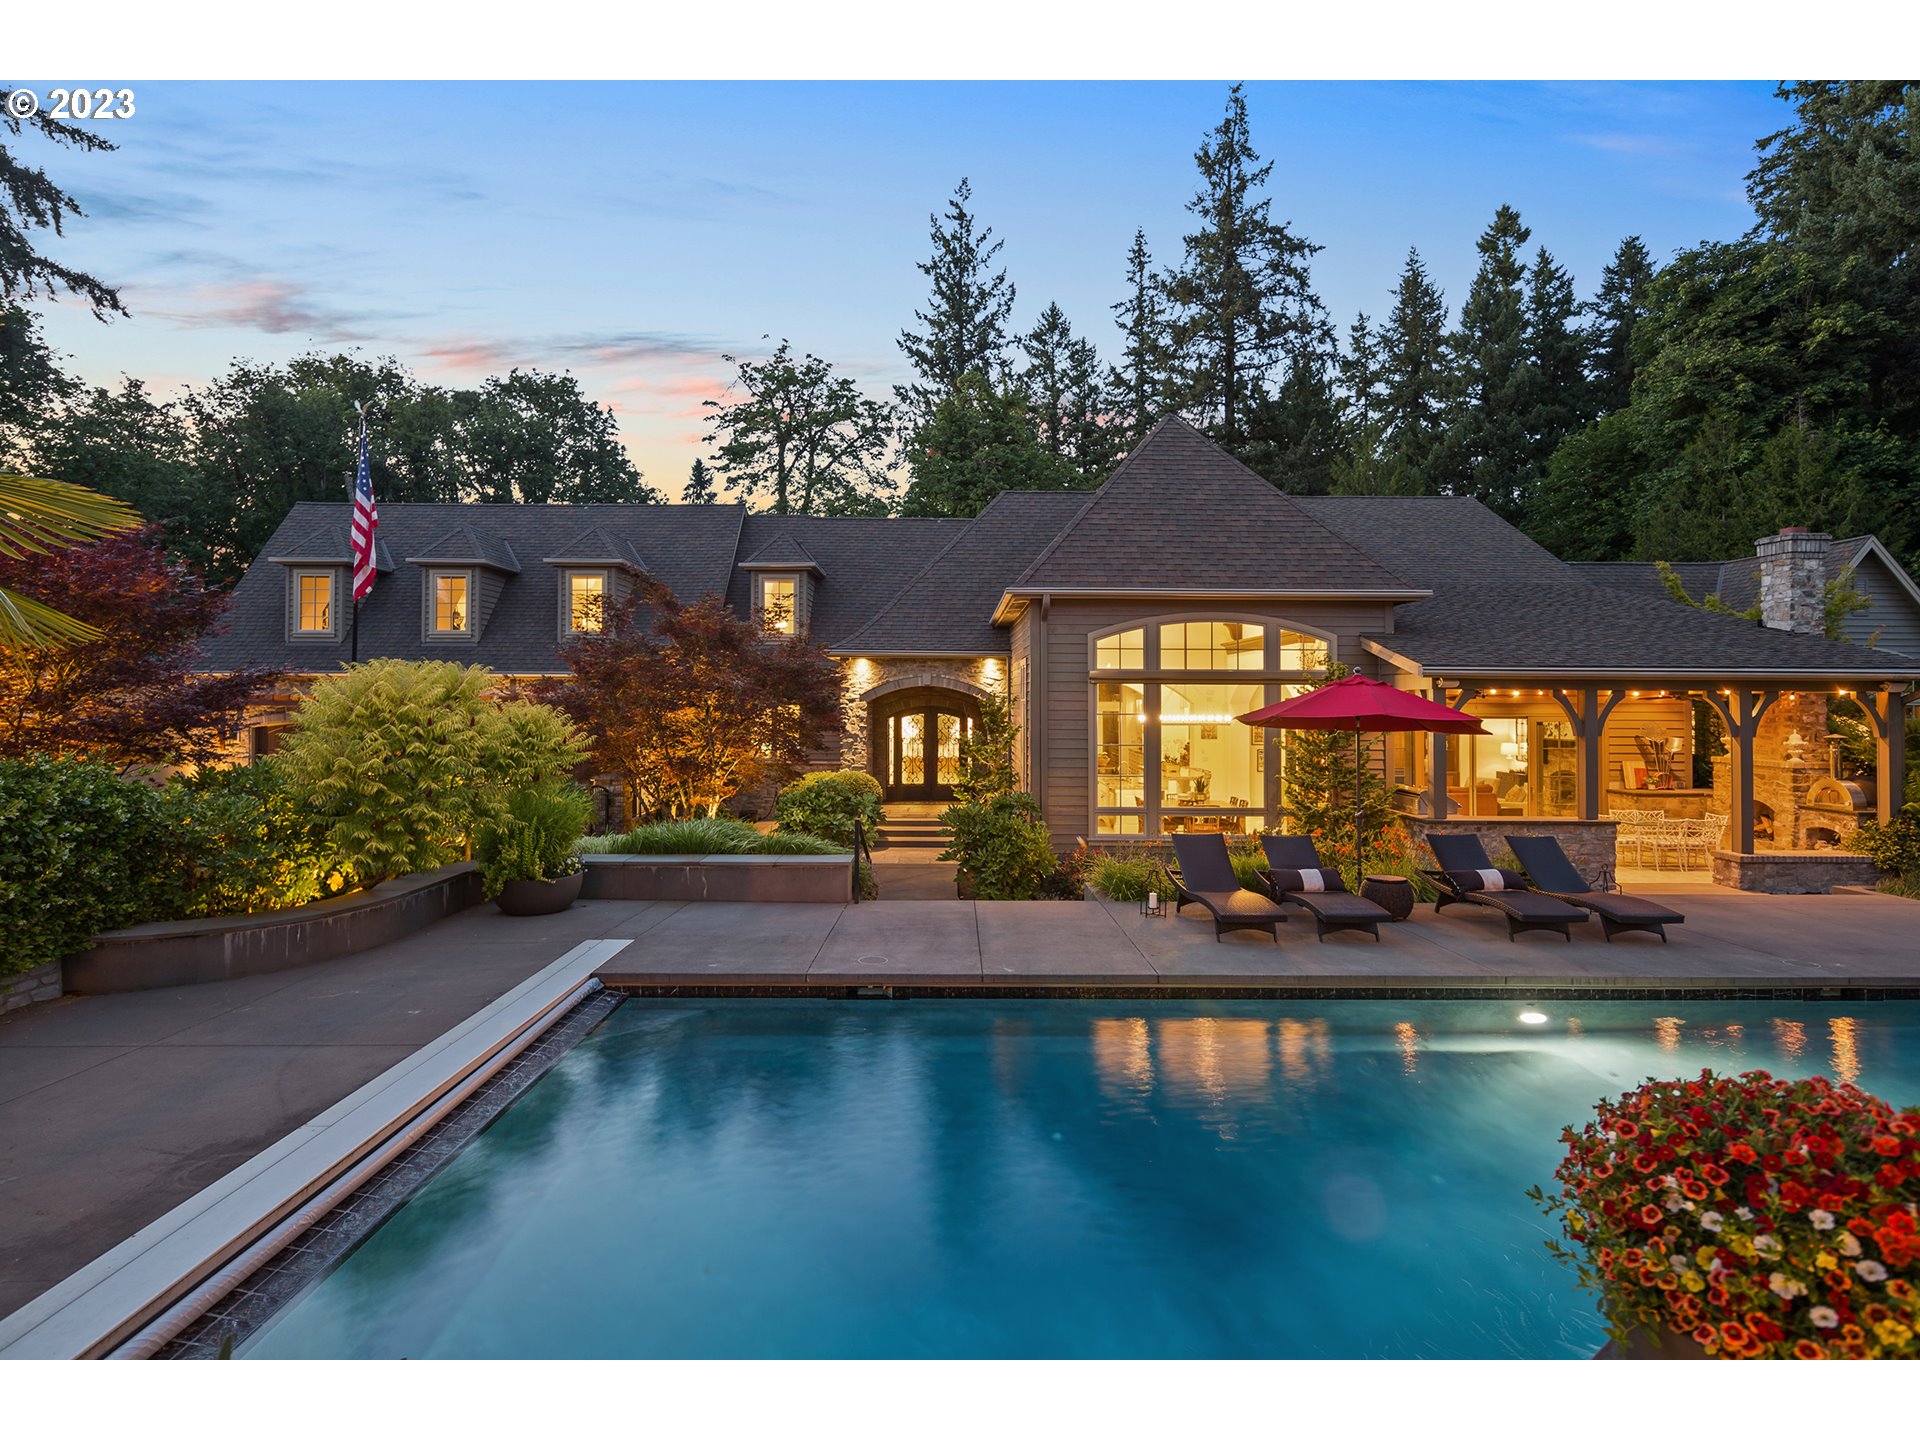 One of Lake Oswego area's most spectacularly secluded vacation where you live estates! This gated 1.88-acre property with an epic pool and pool house, a layout created for entertaining indoors and out, and luxurious finishes throughout. Designed by Curt Olson, principal of Olson Group Architects and built by John Tercek's Stoneridge Custom Development, this very private estate borders a 6.8-acre nature park with five miles of trails in the Forest Highlands neighborhood. The pool house features a great entertaining space including a DJ stage, a kitchenette/bar and a home office/studio as well as 1.5 baths, laundry room and a vaulted oversized two-car garage. The casually elegant home has a fantastic layout with the primary suite on the main floor and a split design of the second floor creating a private guest suite separate from four additional bedrooms, library, theater room, and a home gym. Soaring ceilings highlighted by thick, wooden beams and huge windows flood spacious rooms with natural light. Oversized three-car attached garage and an RV pad.